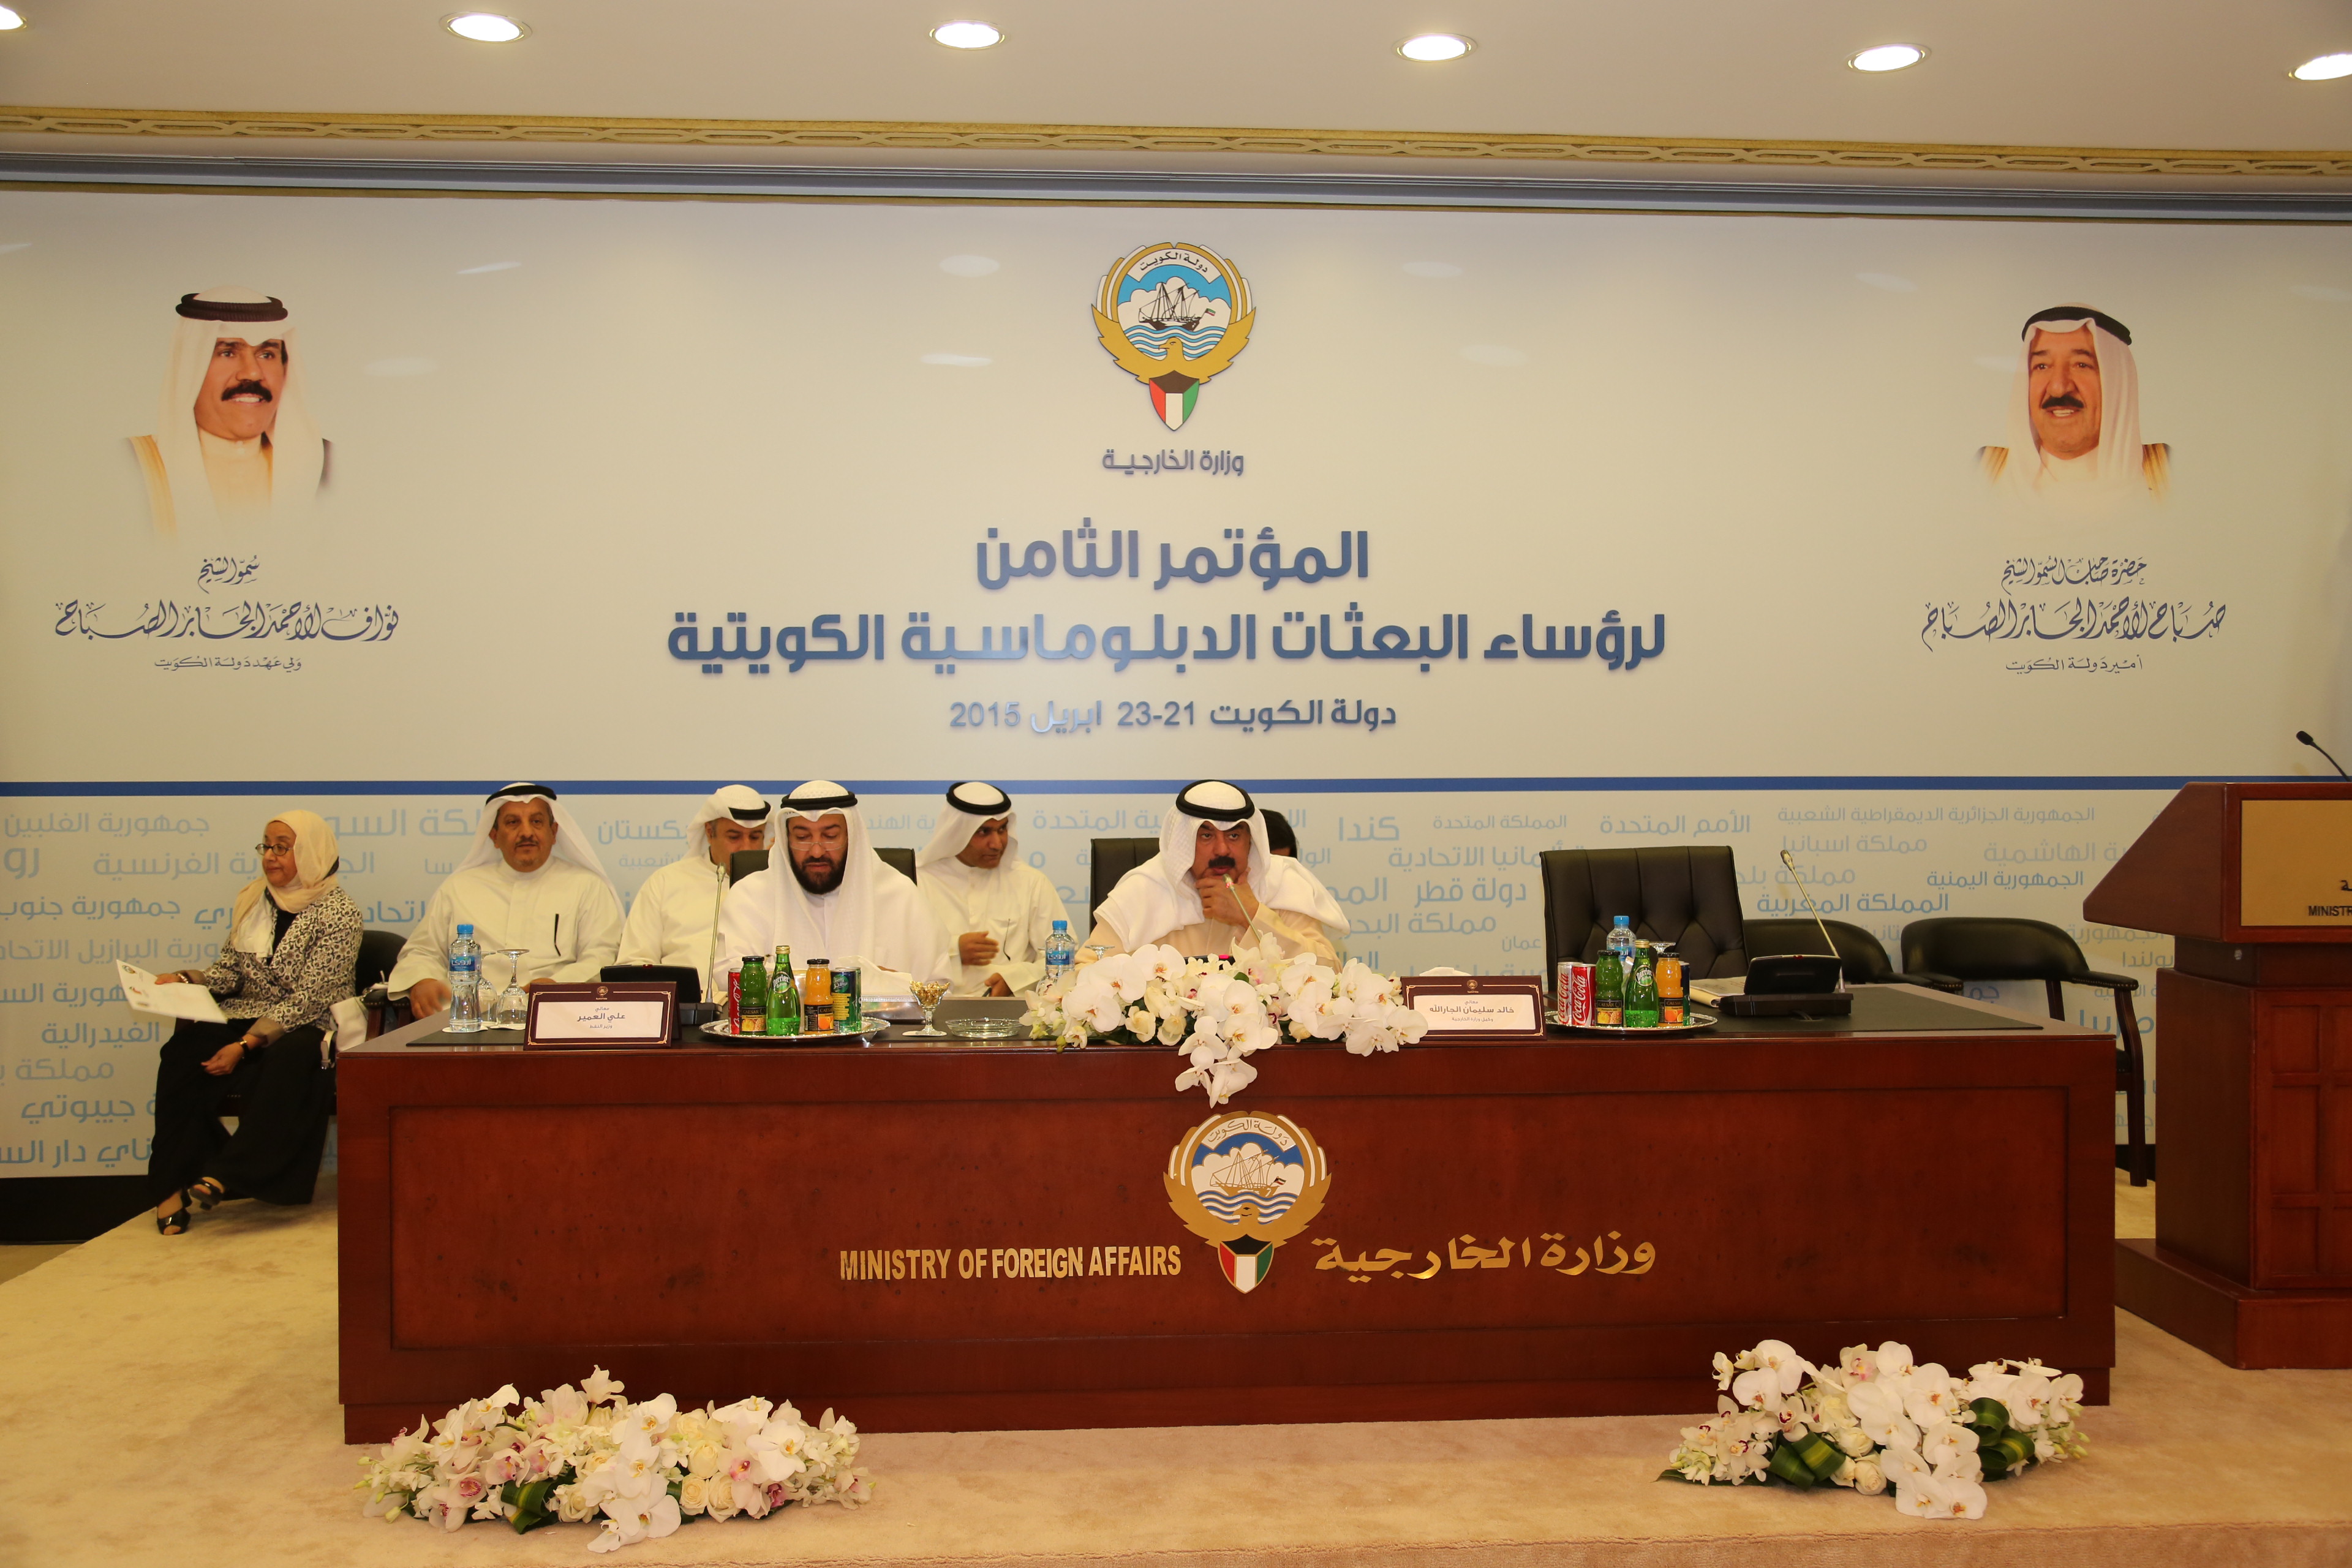 Foreign Ministry Undersecretary Khalid Suleiman Al-Jarallah inaugurates the first morning session of the second day of the 8th conference of Kuwait's heads of missions abroad